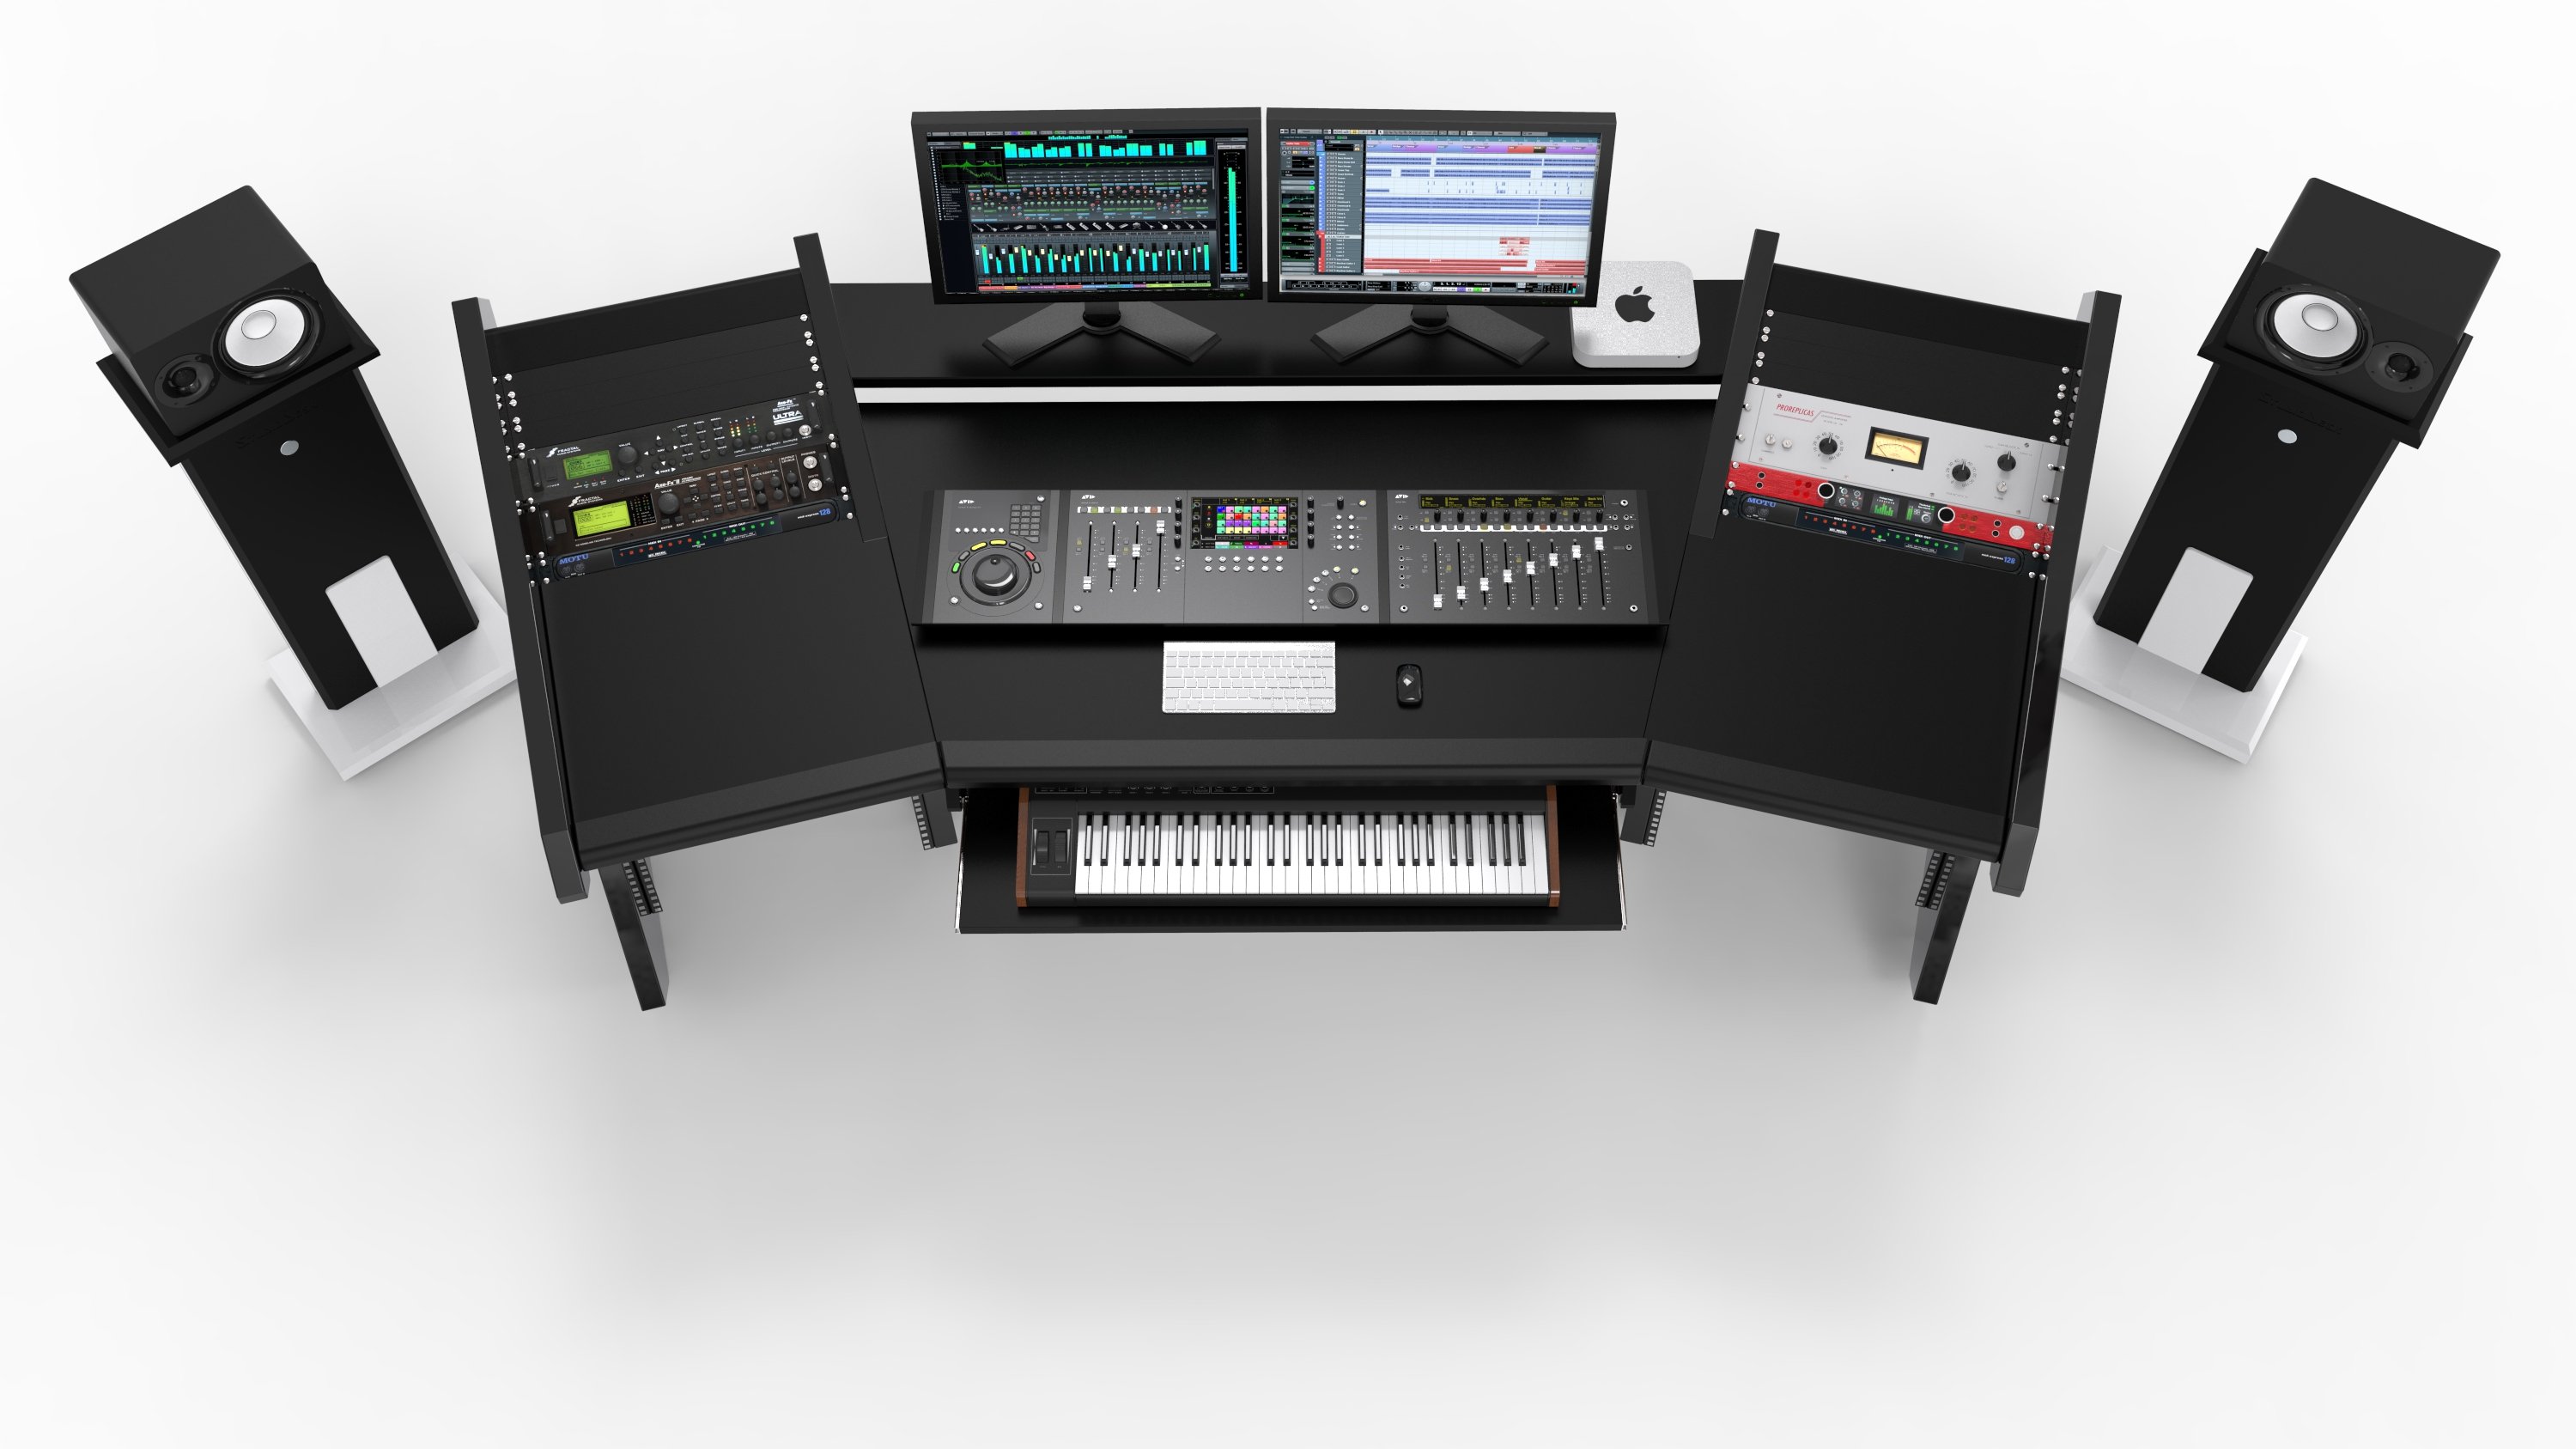 PRO LINE SL Series Studio Workstation by Studio Desk with 16 U Rack Spaces for Professional or Home Studio. 